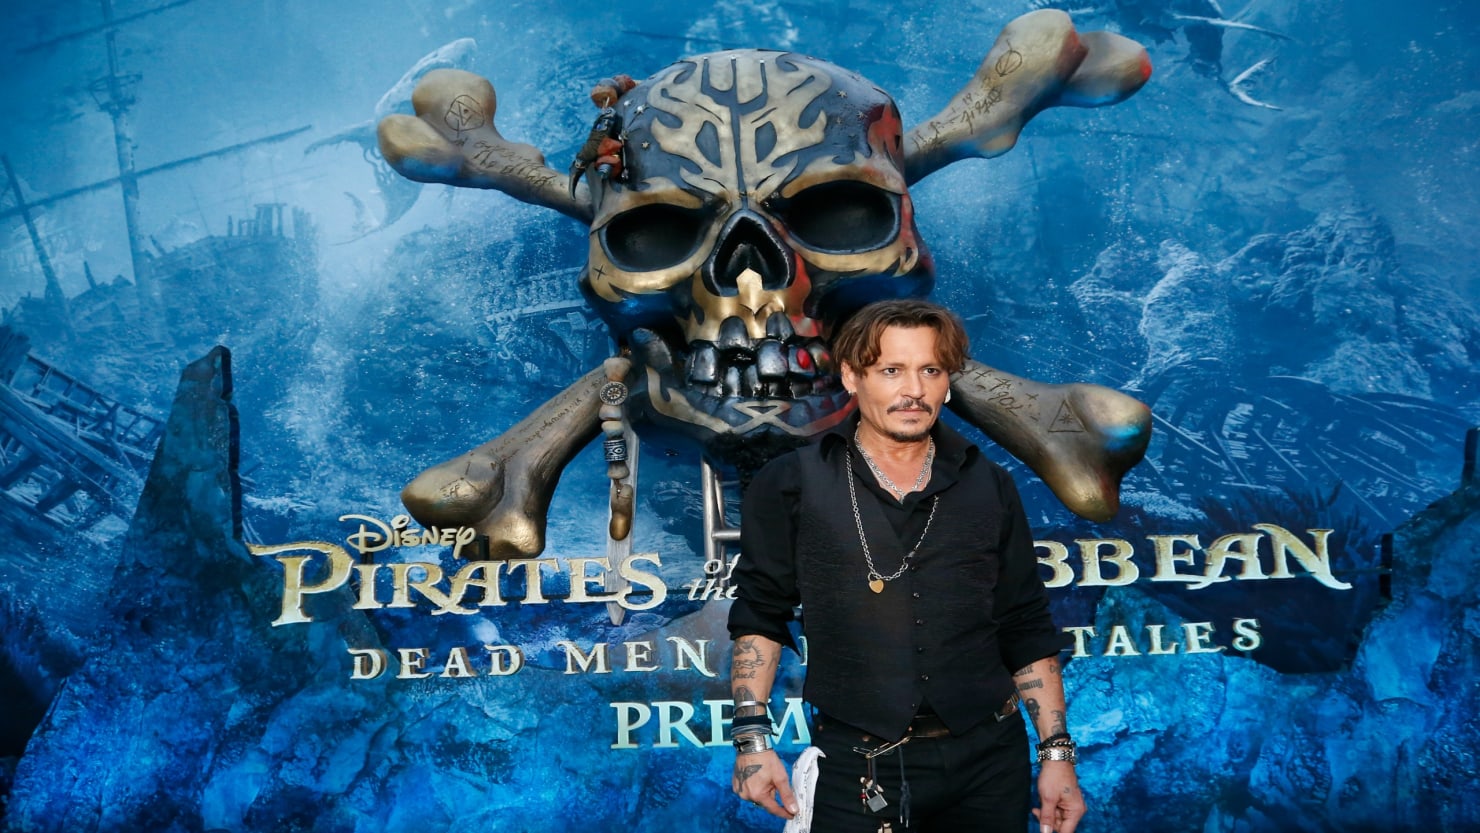 ‘Pirates of the Caribbean’ Wins Holiday Box Office